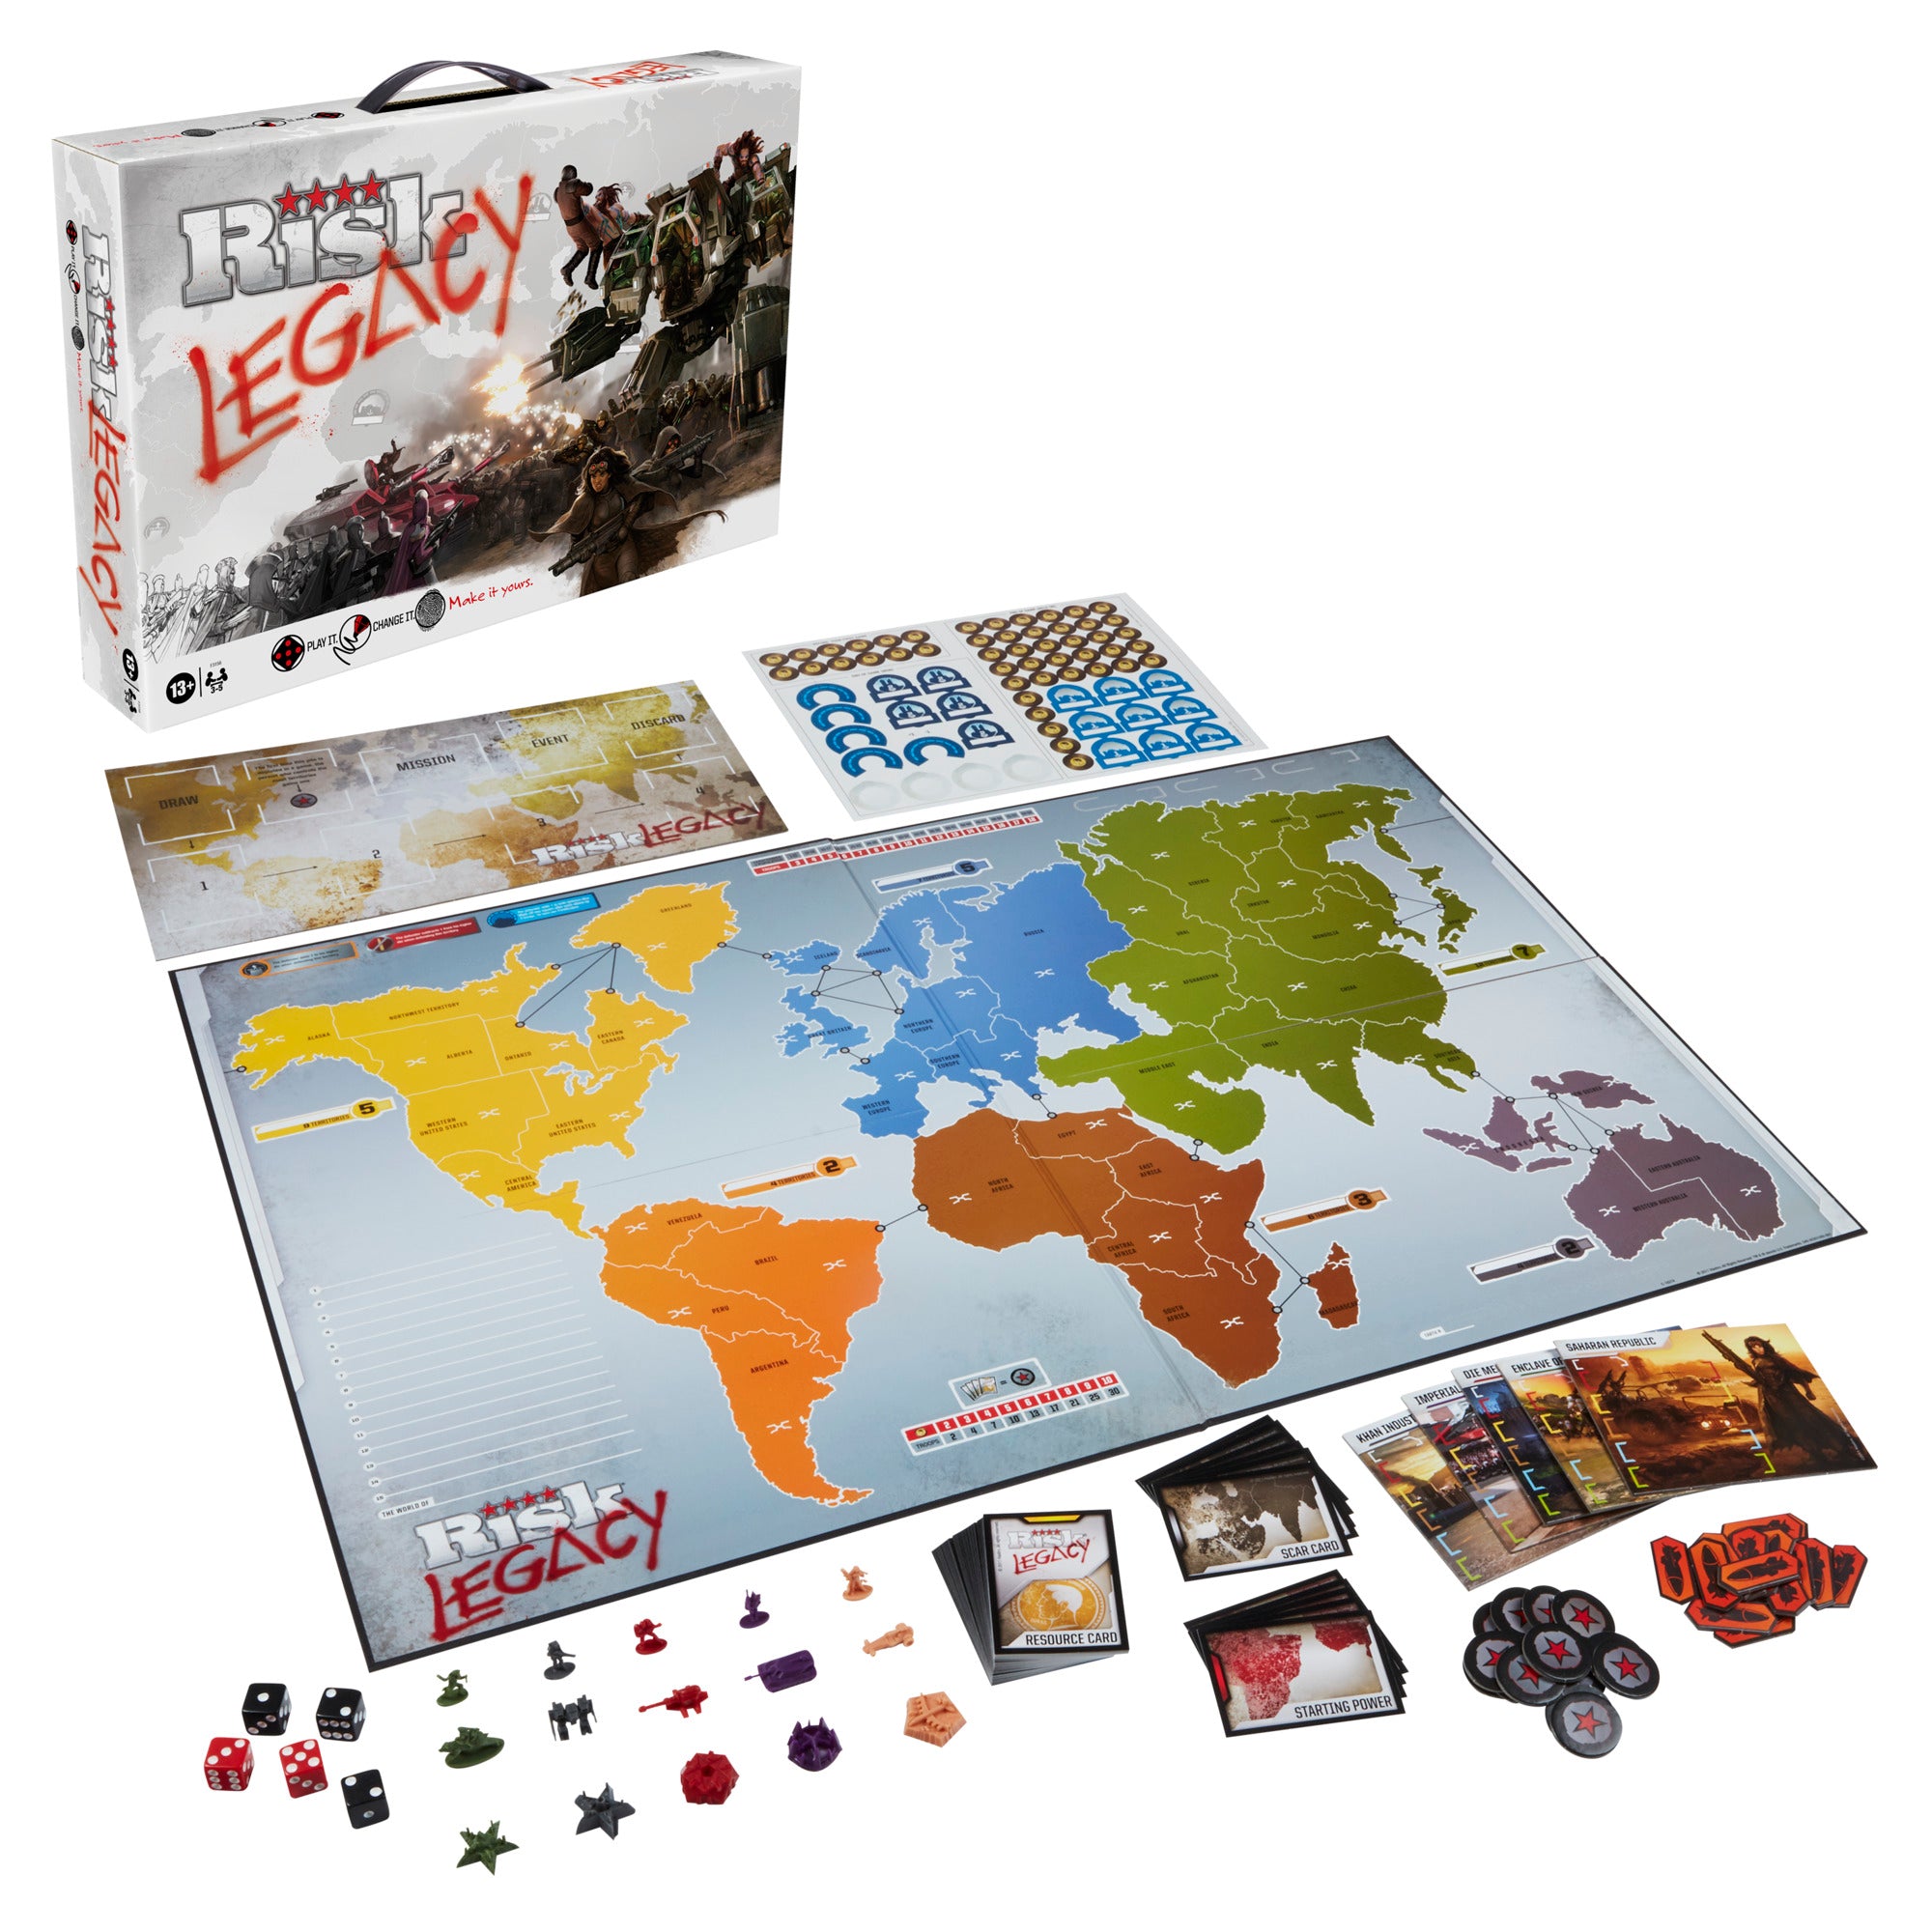 Risk Strike sells a 20-minute version of the classic world